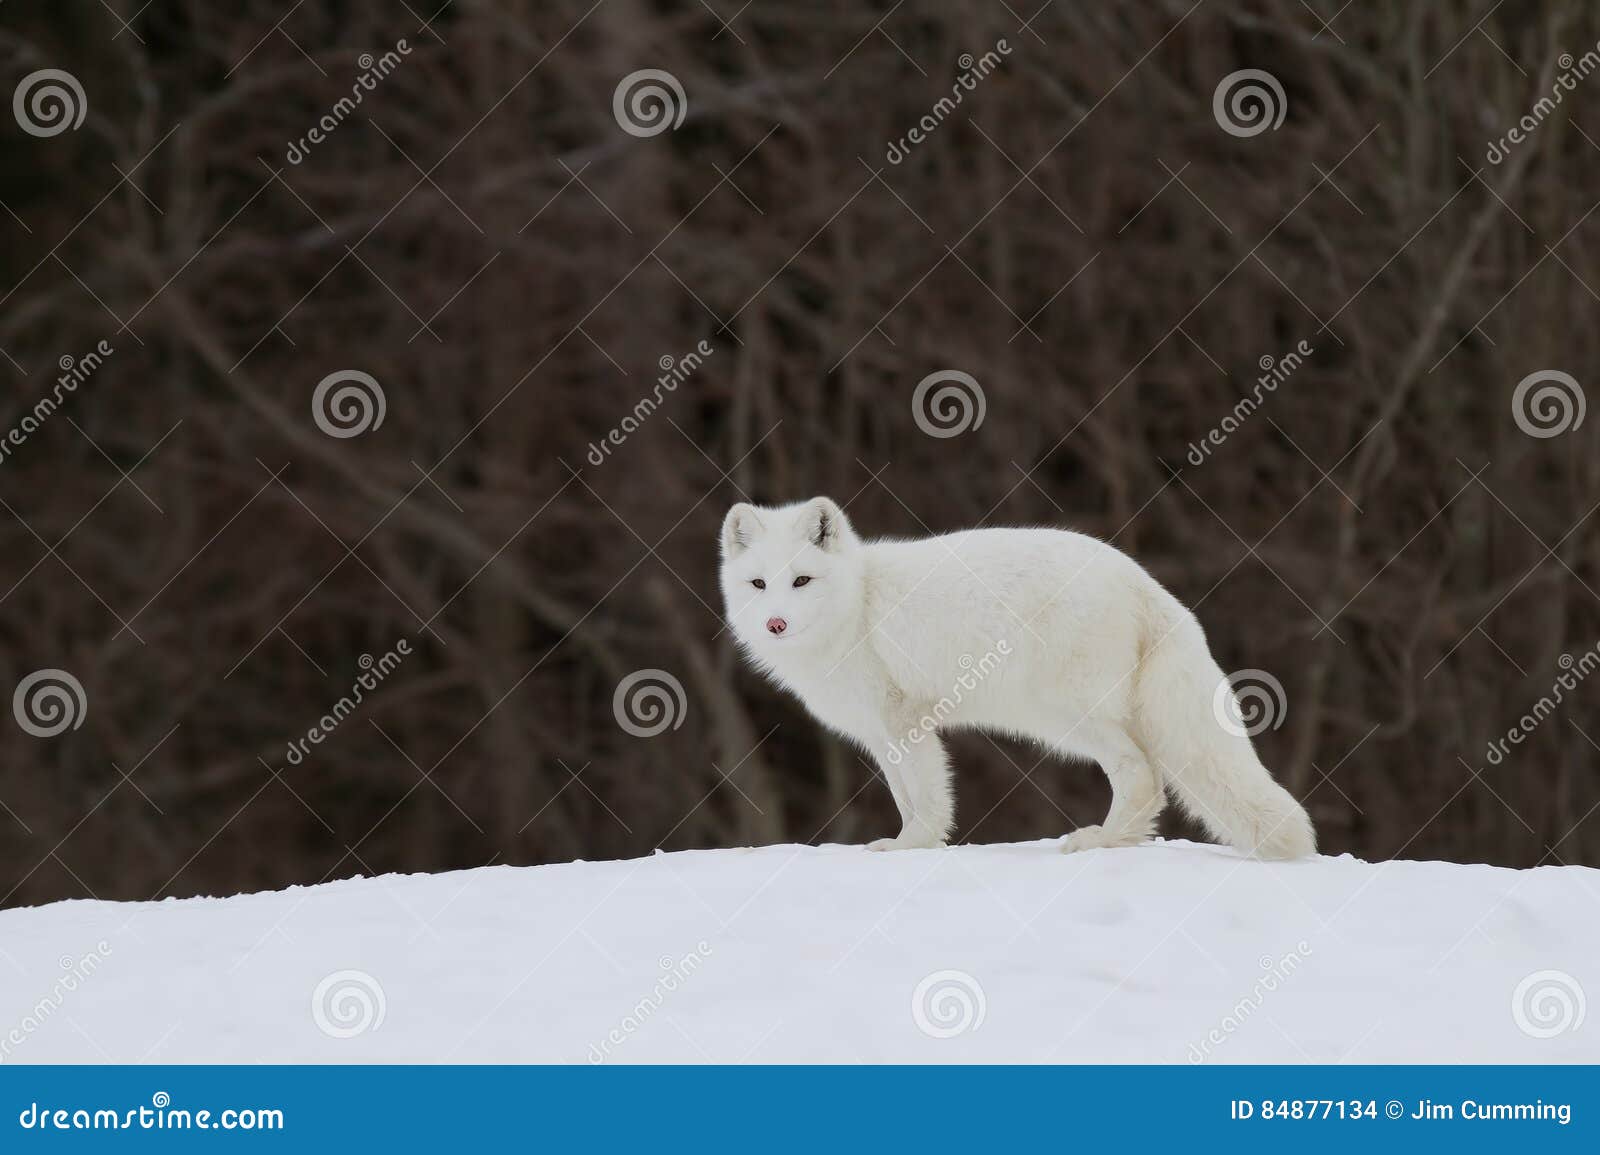 arctic fox (vulpes lagopus) standing in the winter snow in canada